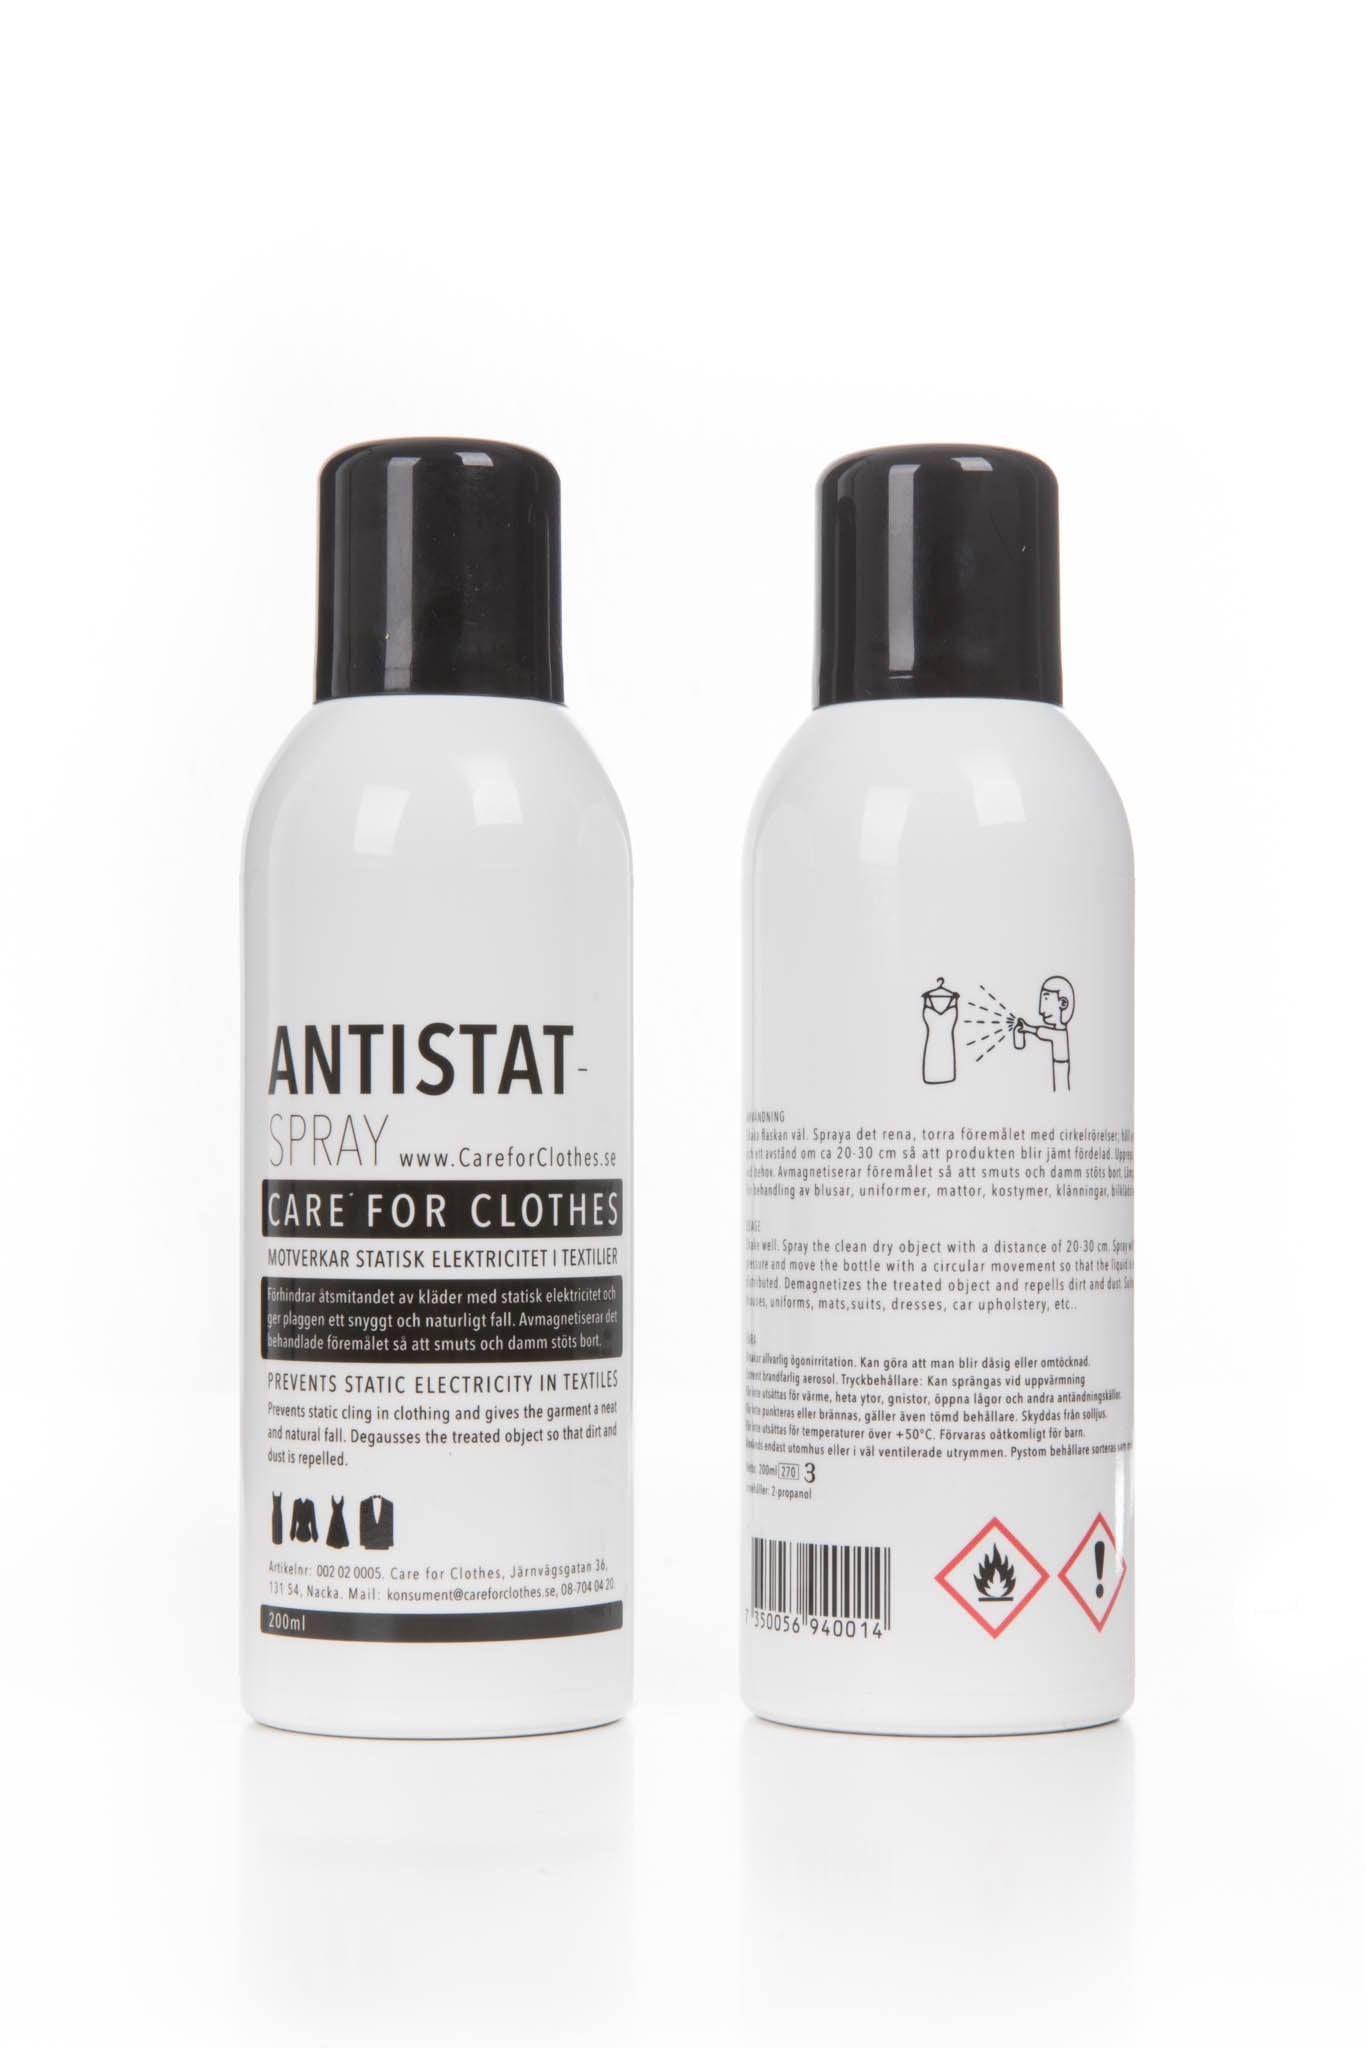 ANTISTAT SPRAY 200ml Counteracts static electricity in textiles